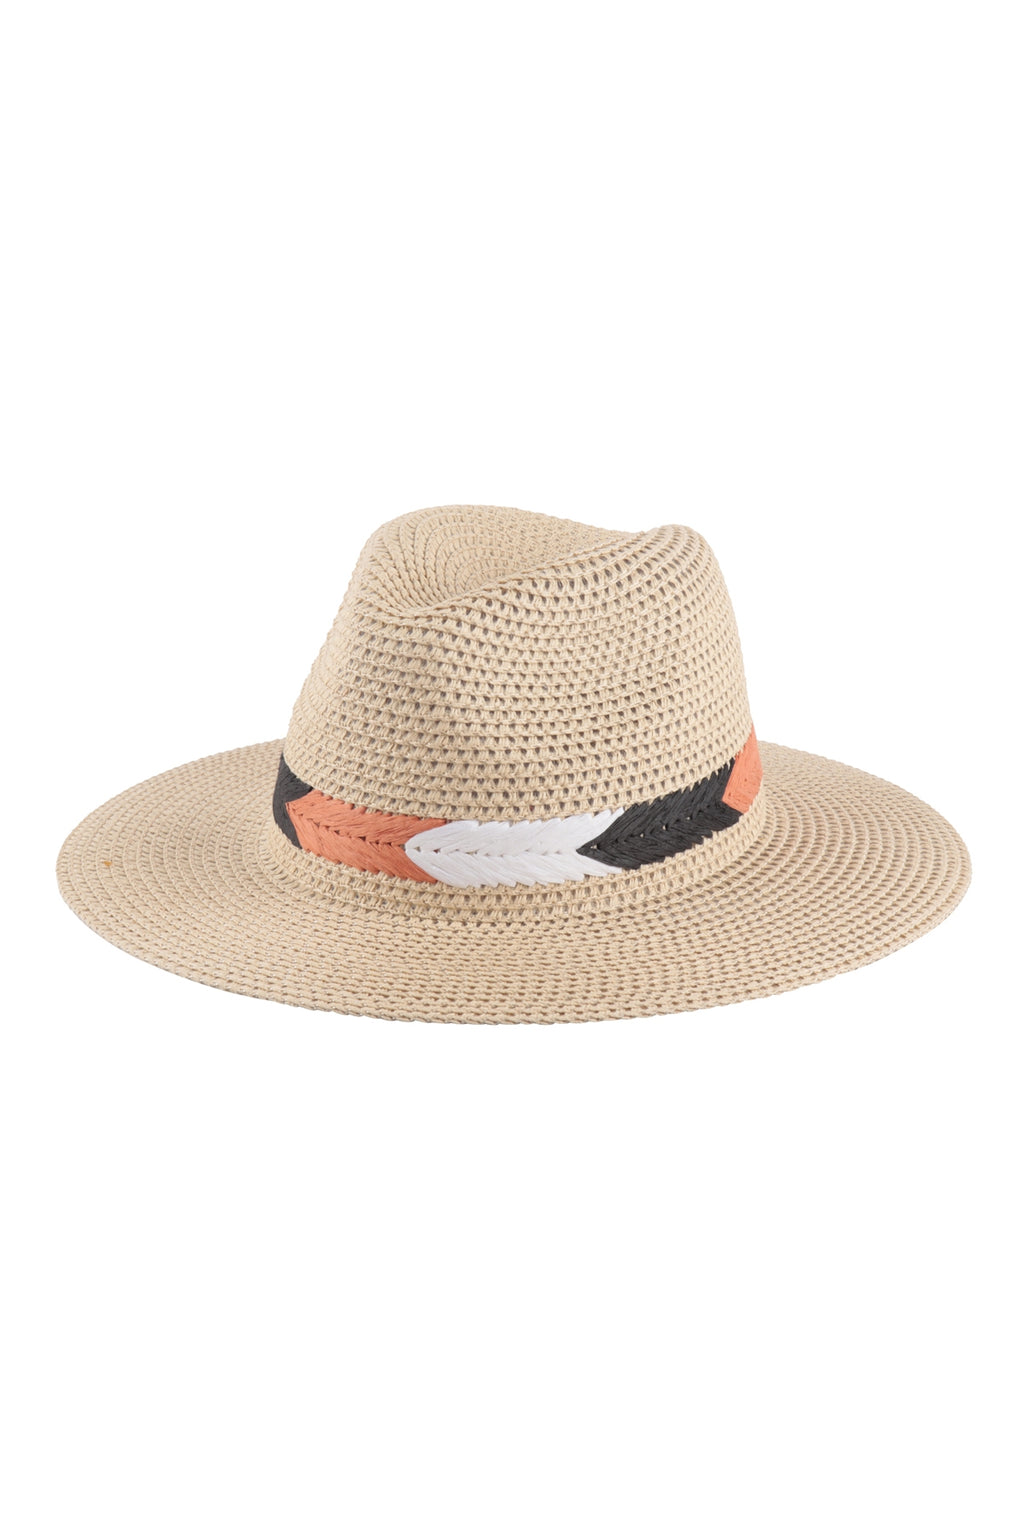 Panama Brim Summer Hat with Braided Stripe Accent Ivory - Pack of 6